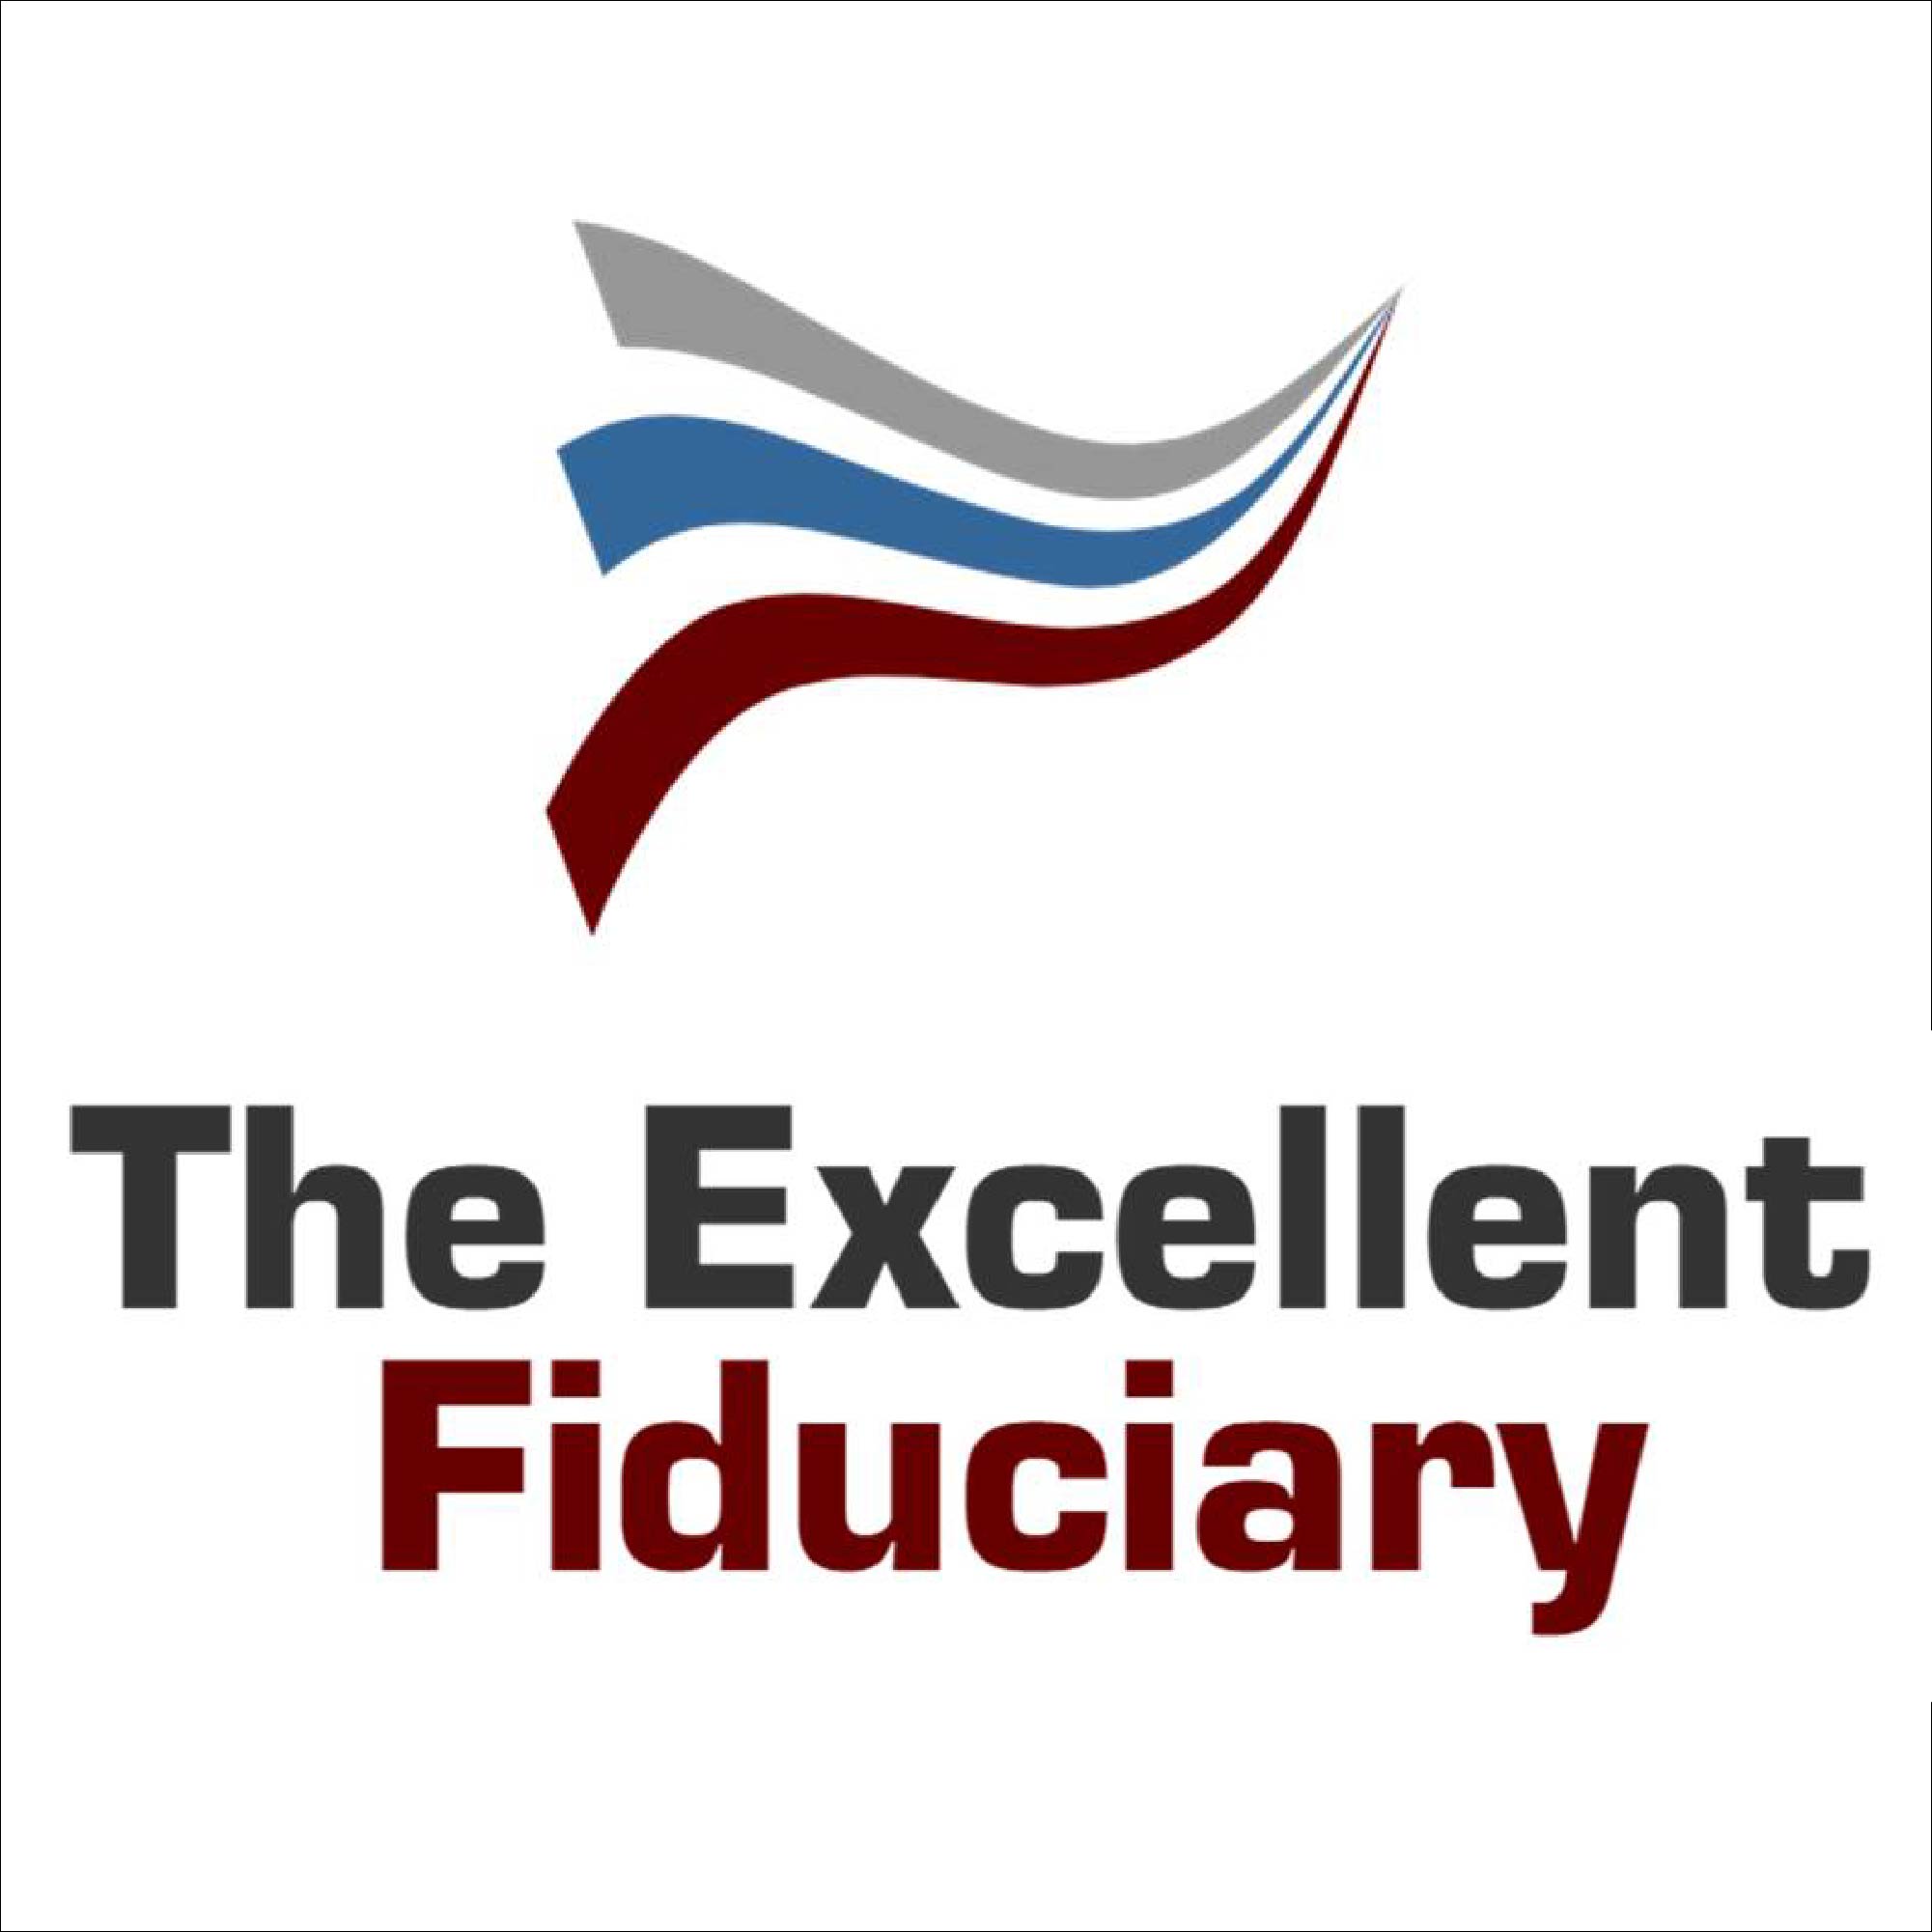 Human Resources Leaders as Investment Fiduciaries